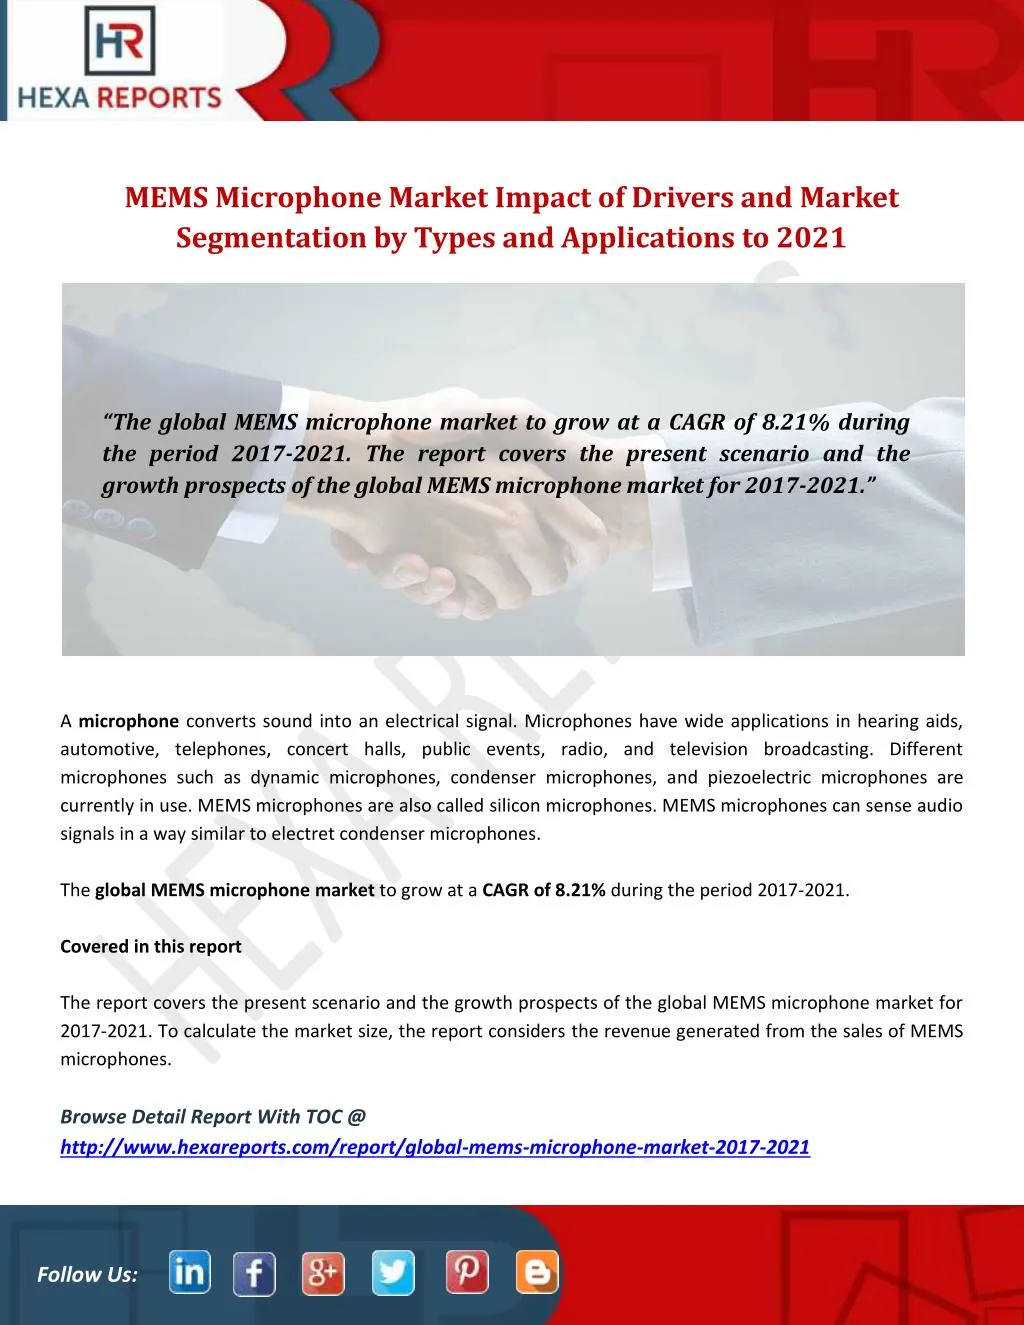 mems microphone market impact of drivers